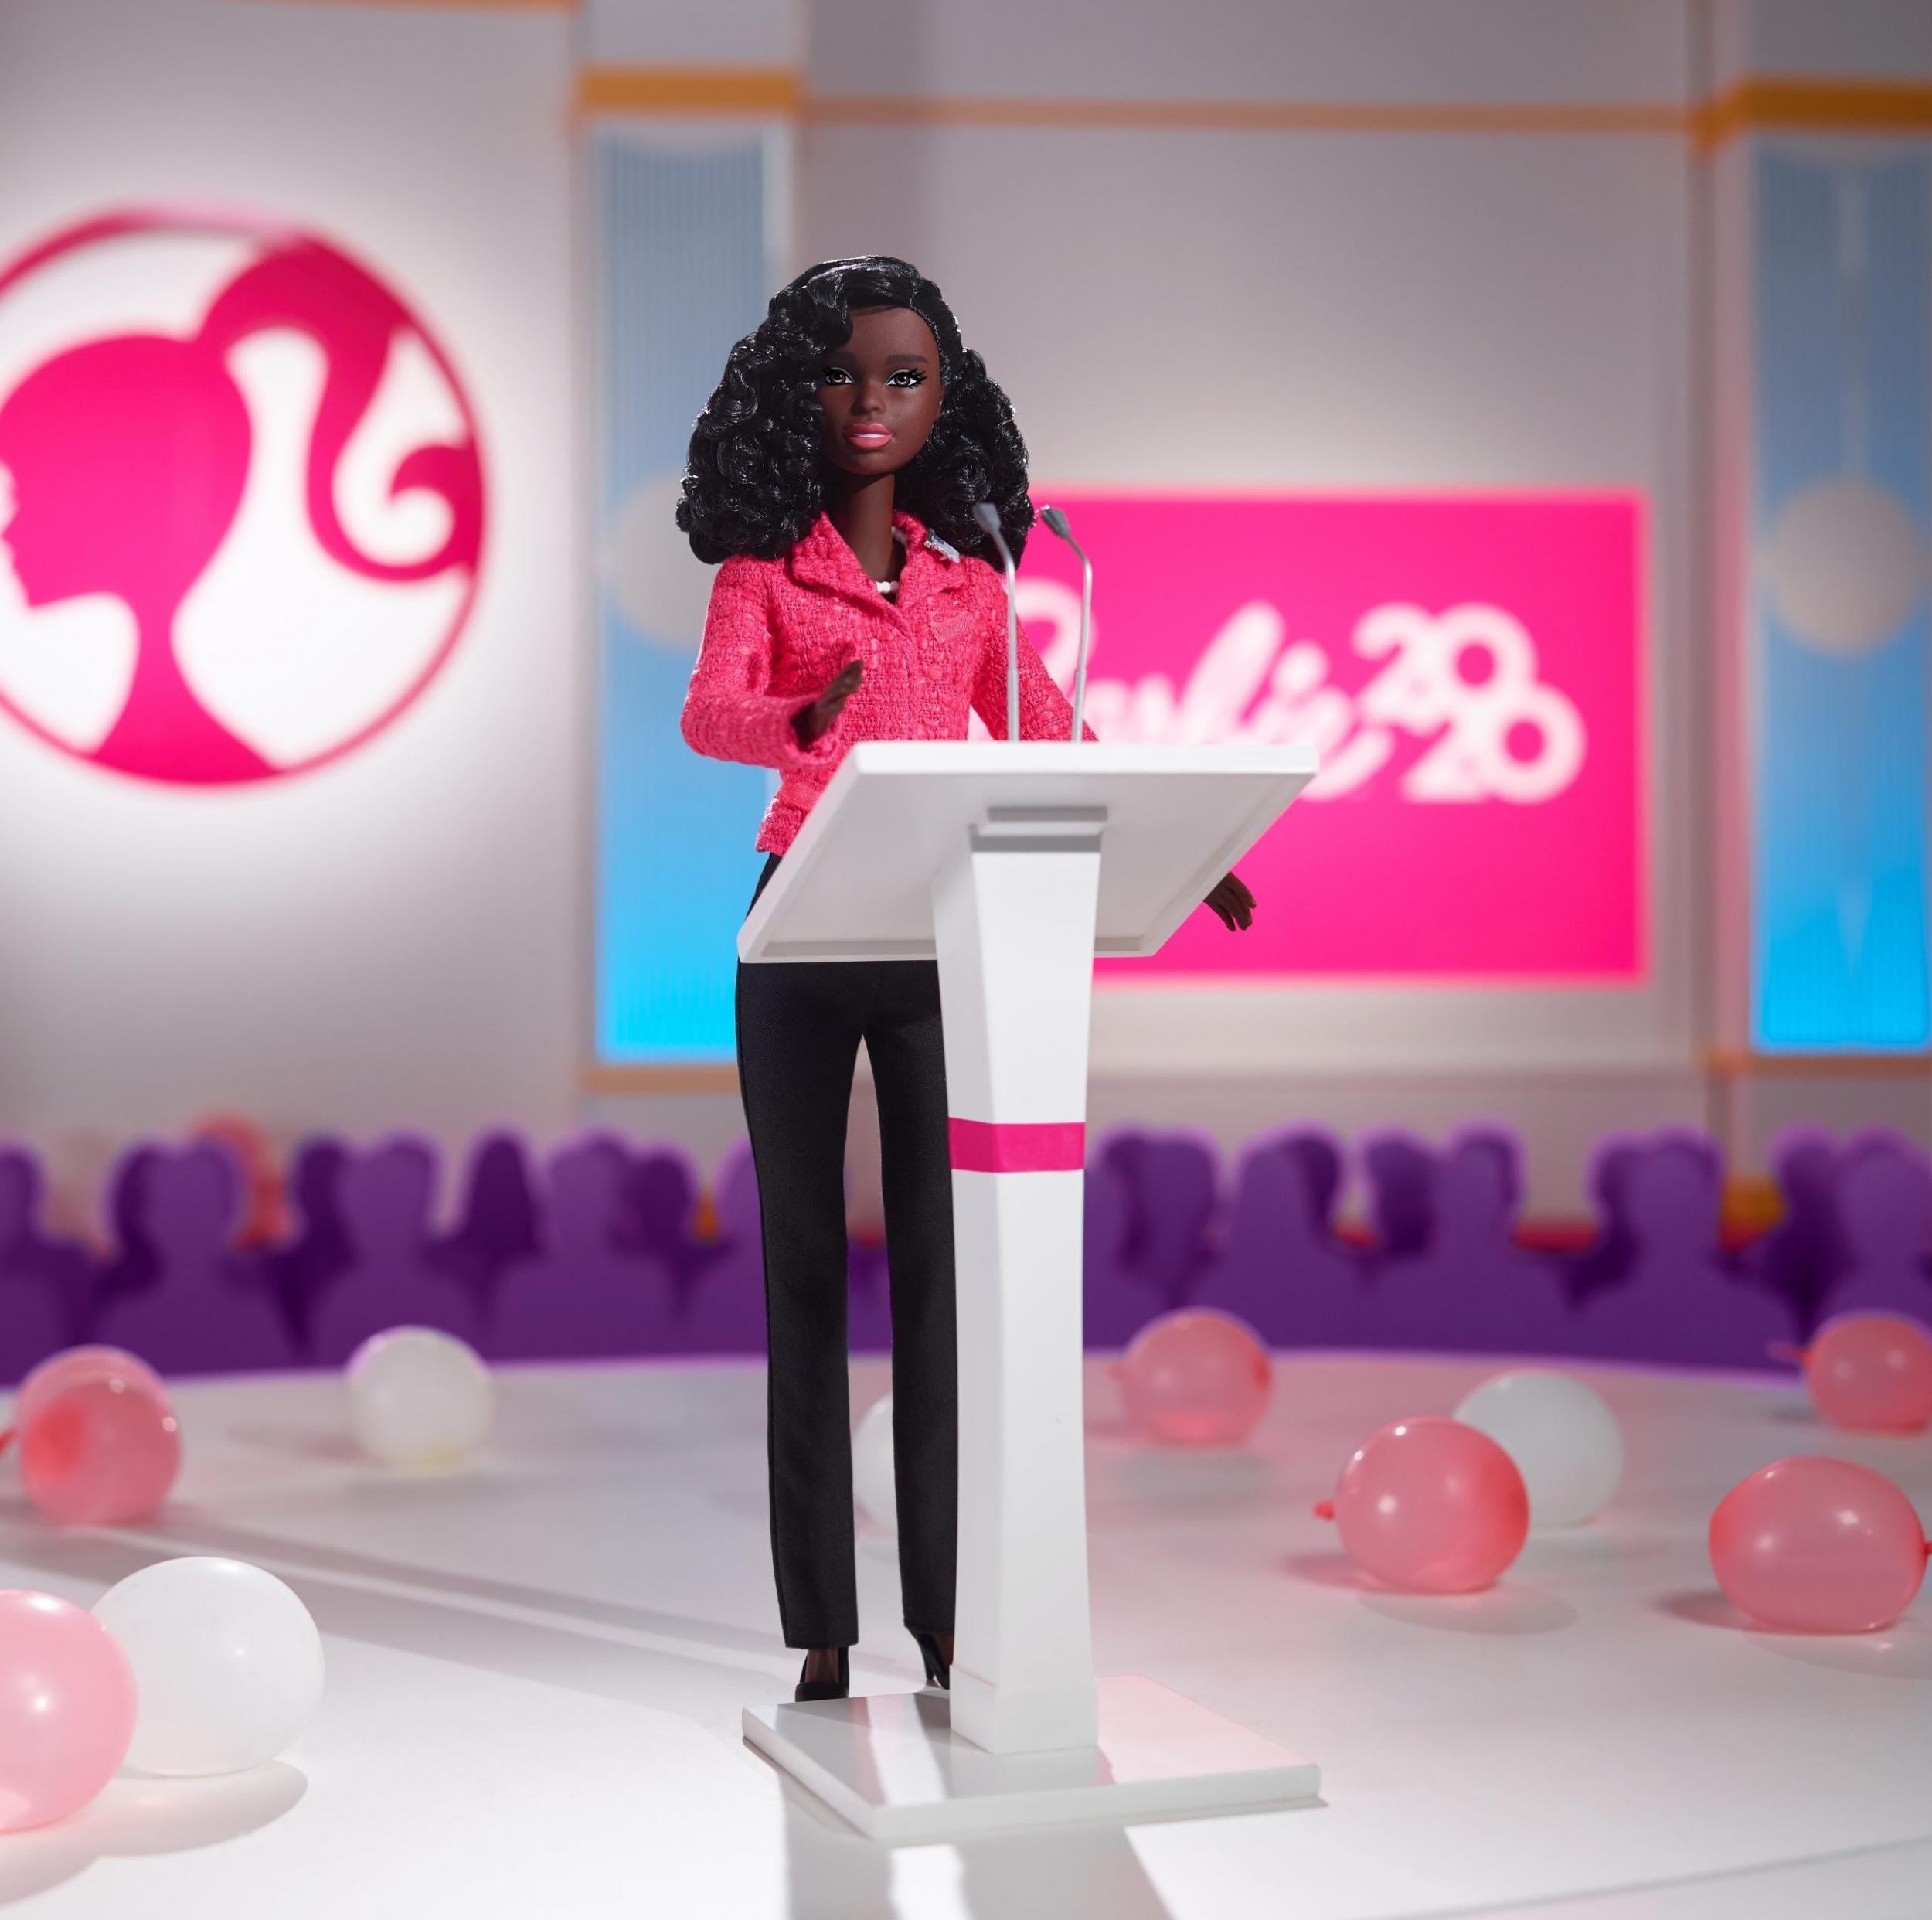 New doll set includes a black female presidential candidate dressed in a pink blazer (Mattel)